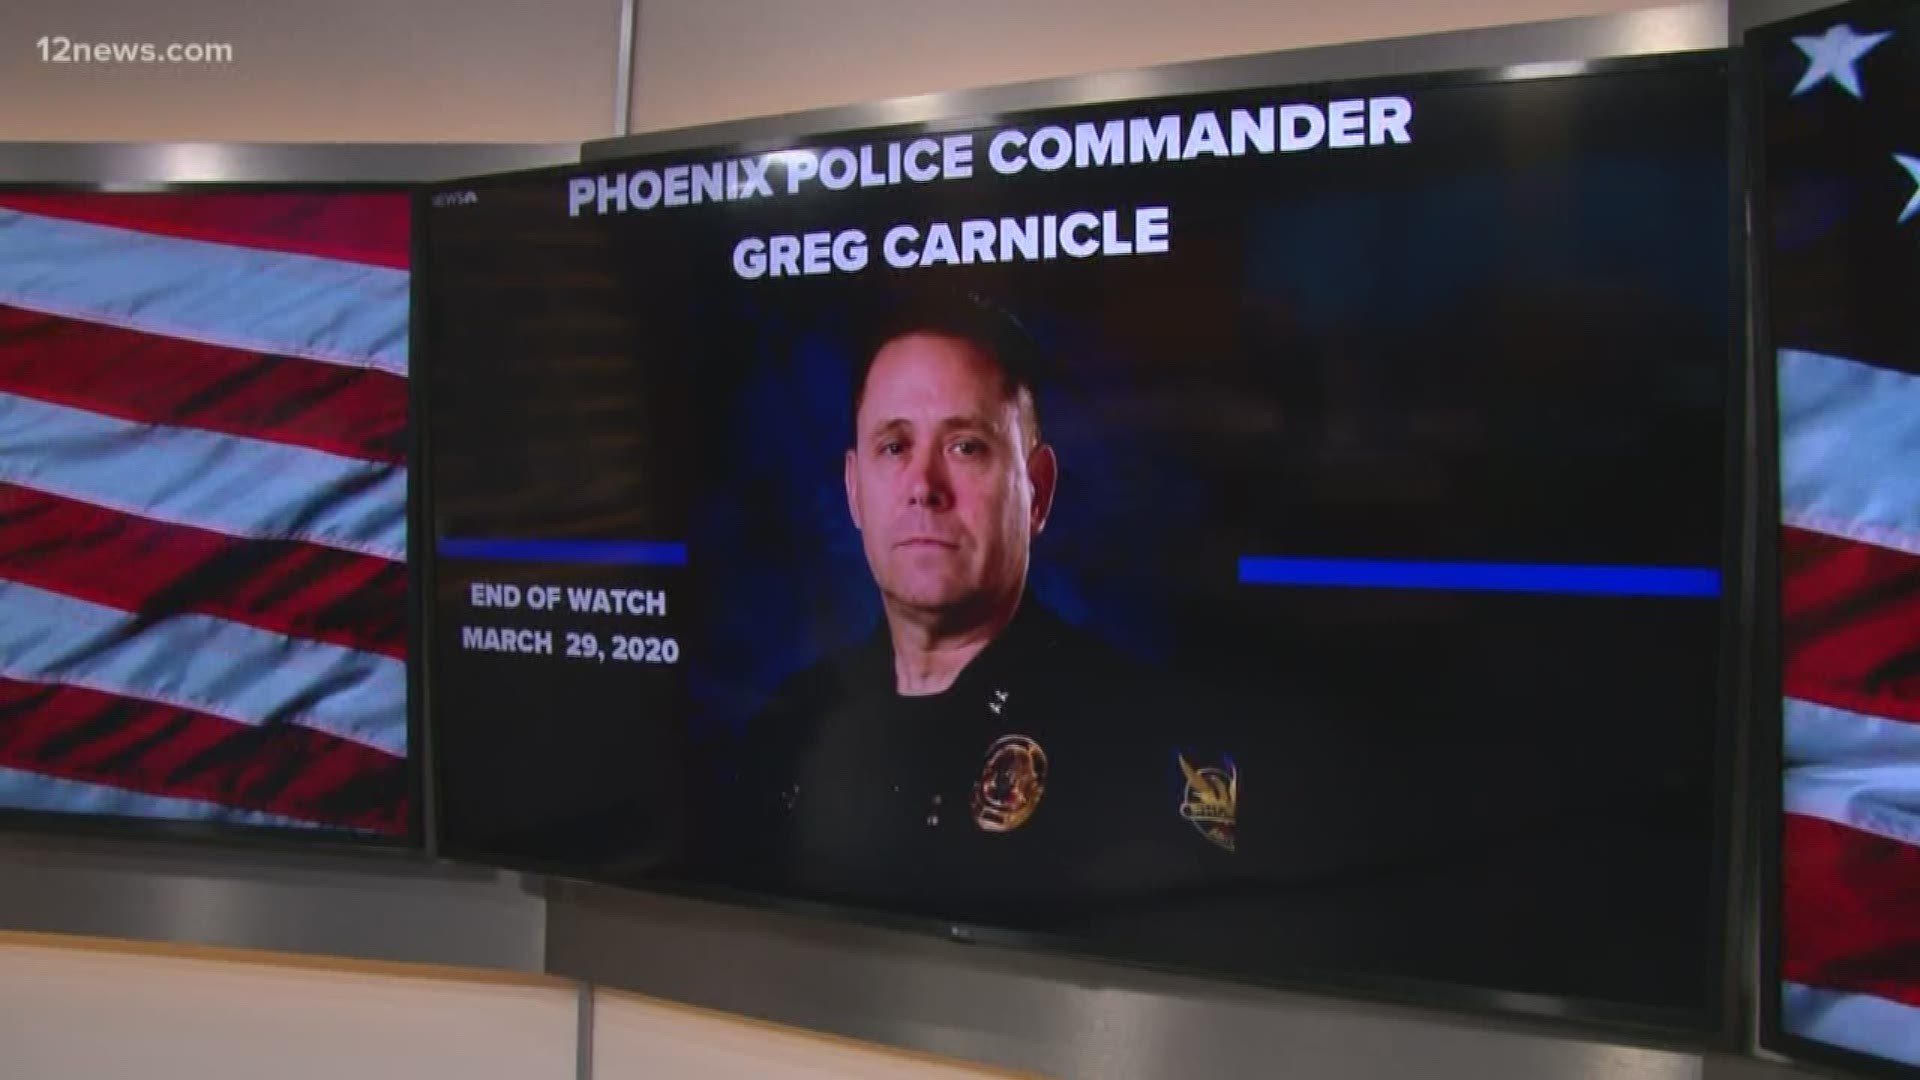 Commander Greg Carnicle was killed while responding to a domestic violence call in Phoenix on Sunday. Team 12's Matt Yurus has the latest.